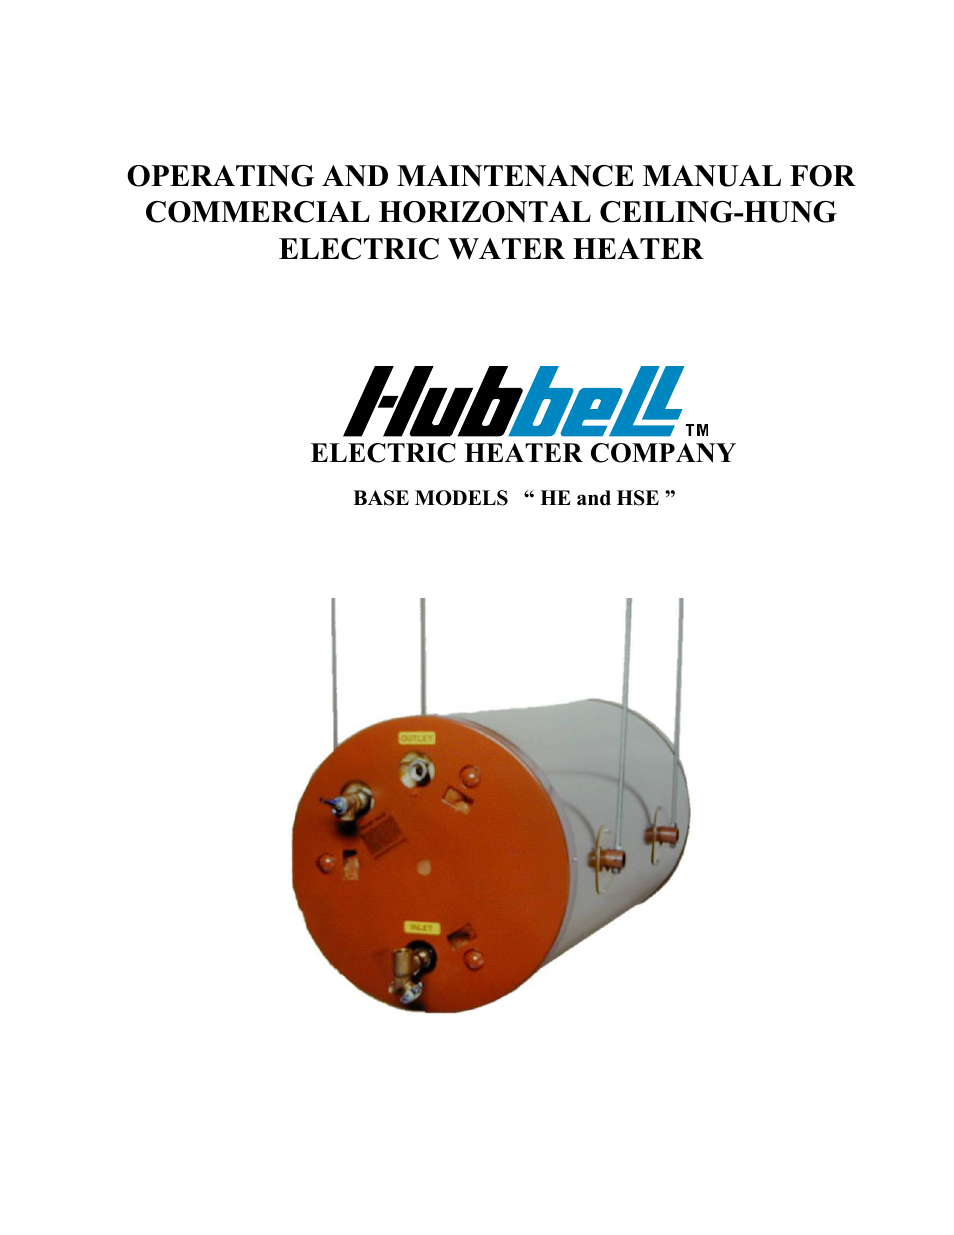 Hubbell Electric Heater Company HSE User Manual | 22 pages